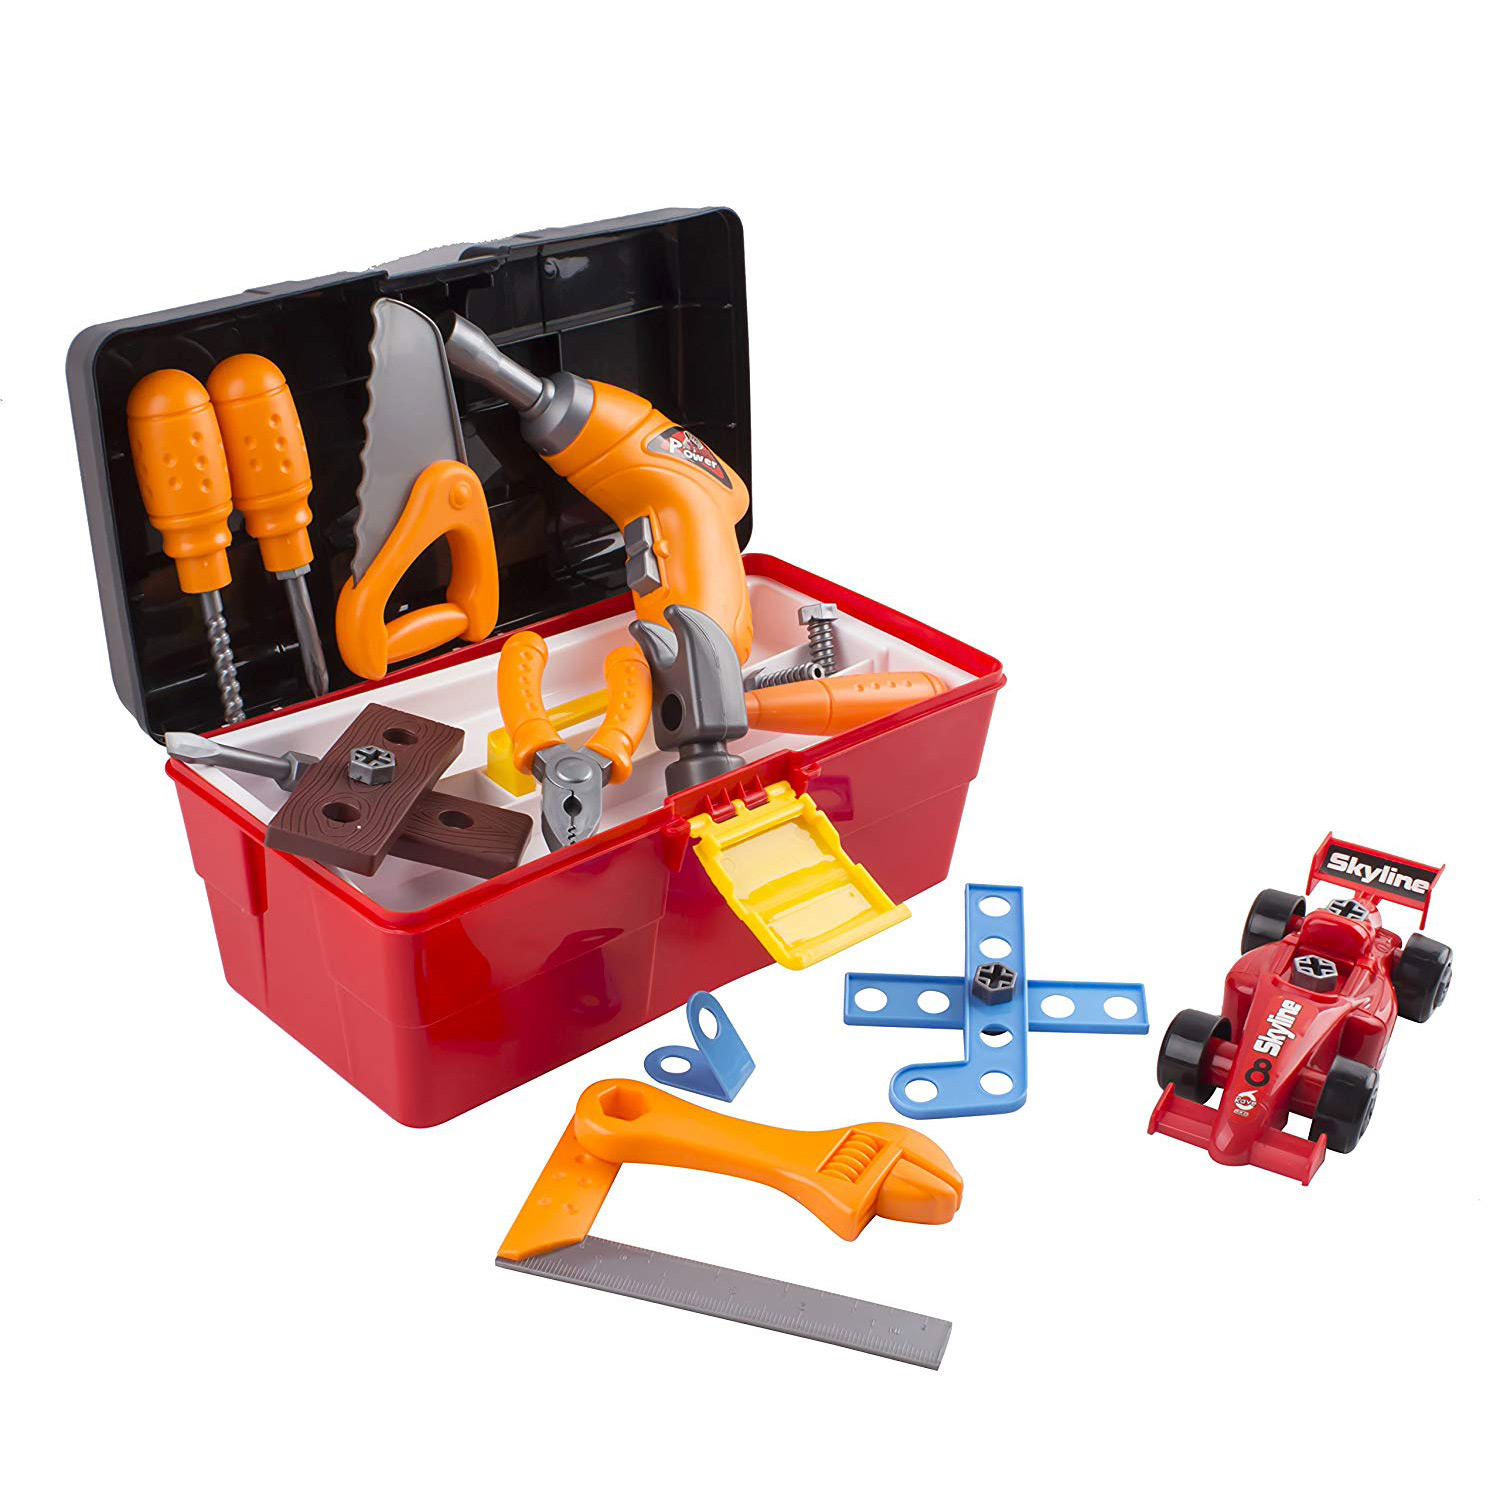 44 Piece Toy Tool Set With Construction Kit Accessories Portable Realistic Tools Box Including Electric Drill Hammer Wrench Screwdriver F1 Car Perfect For Boys Childrenâ€™s Educational STEM Pretend Play